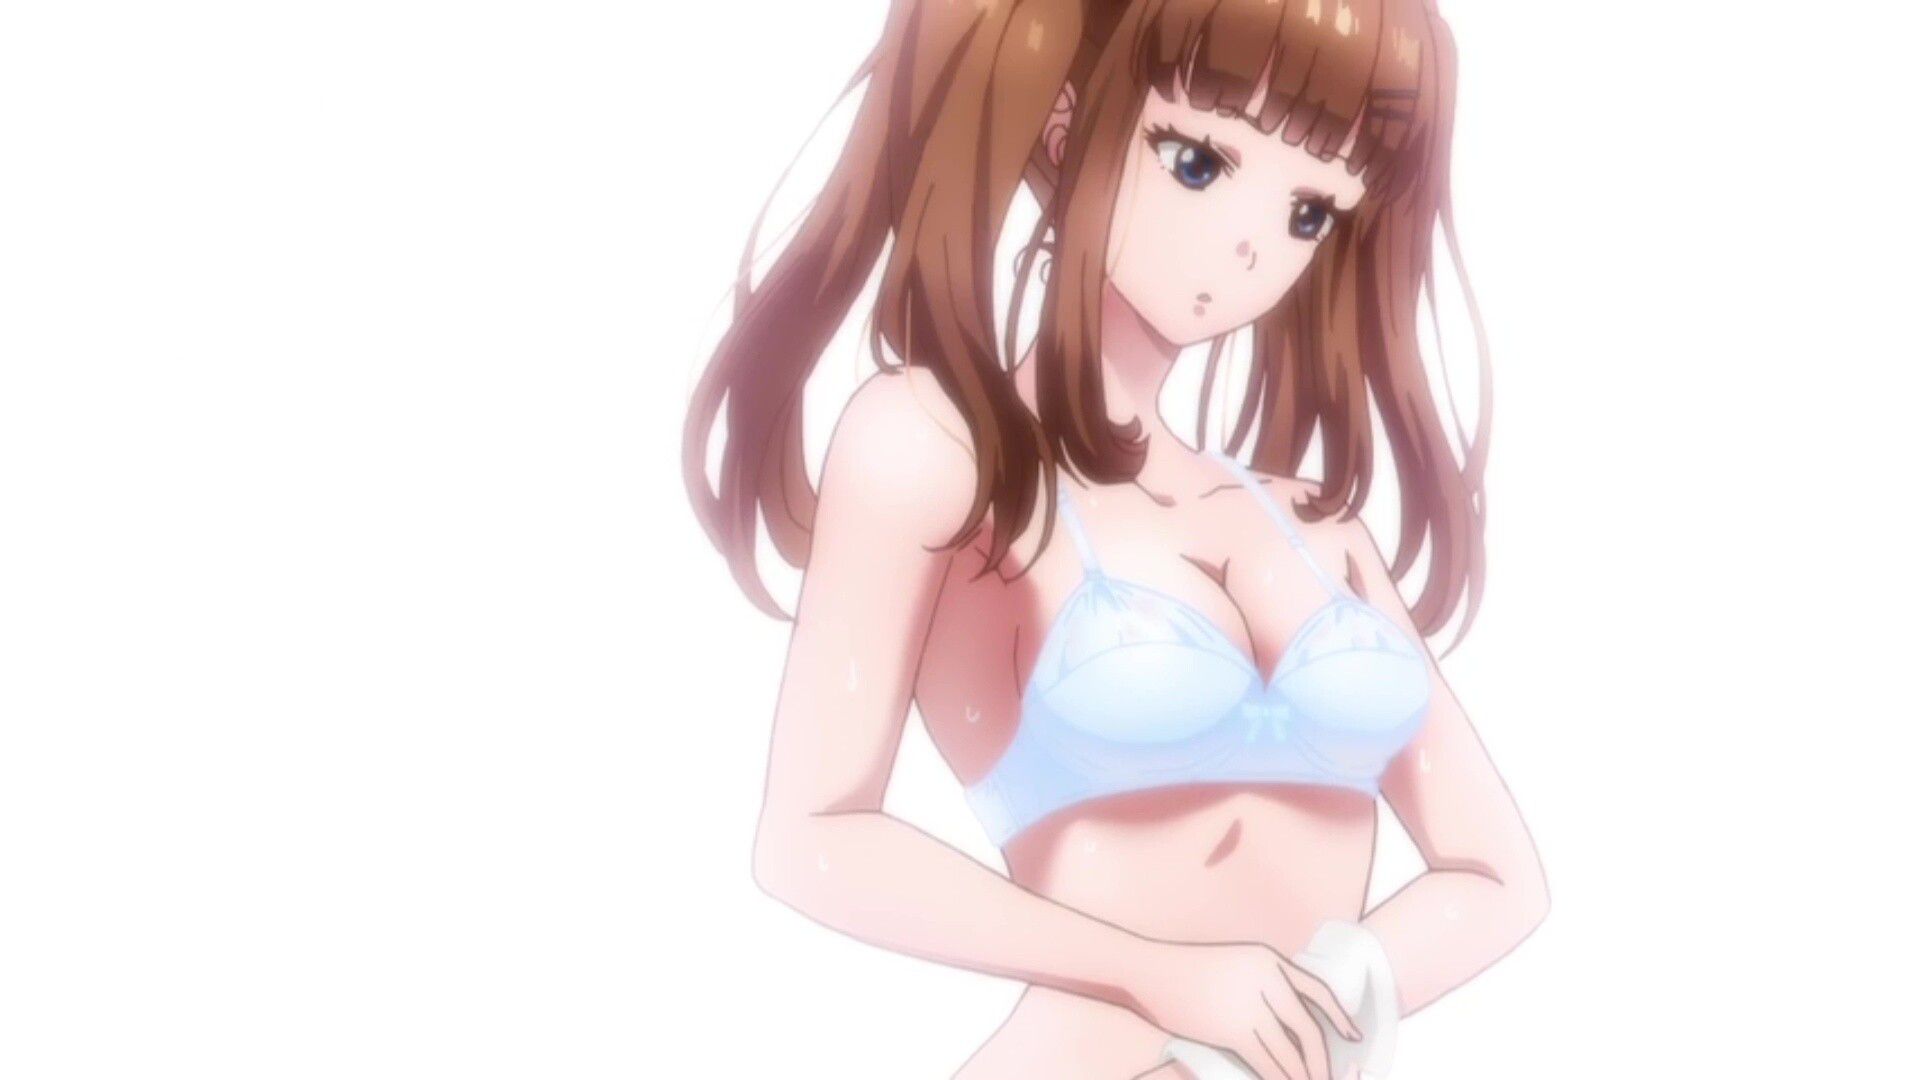 In episode 9 of the anime "Tomodachi Game", an erotic scene in which pants and bra are transparent in the depiction of underwear that is too erotic 17